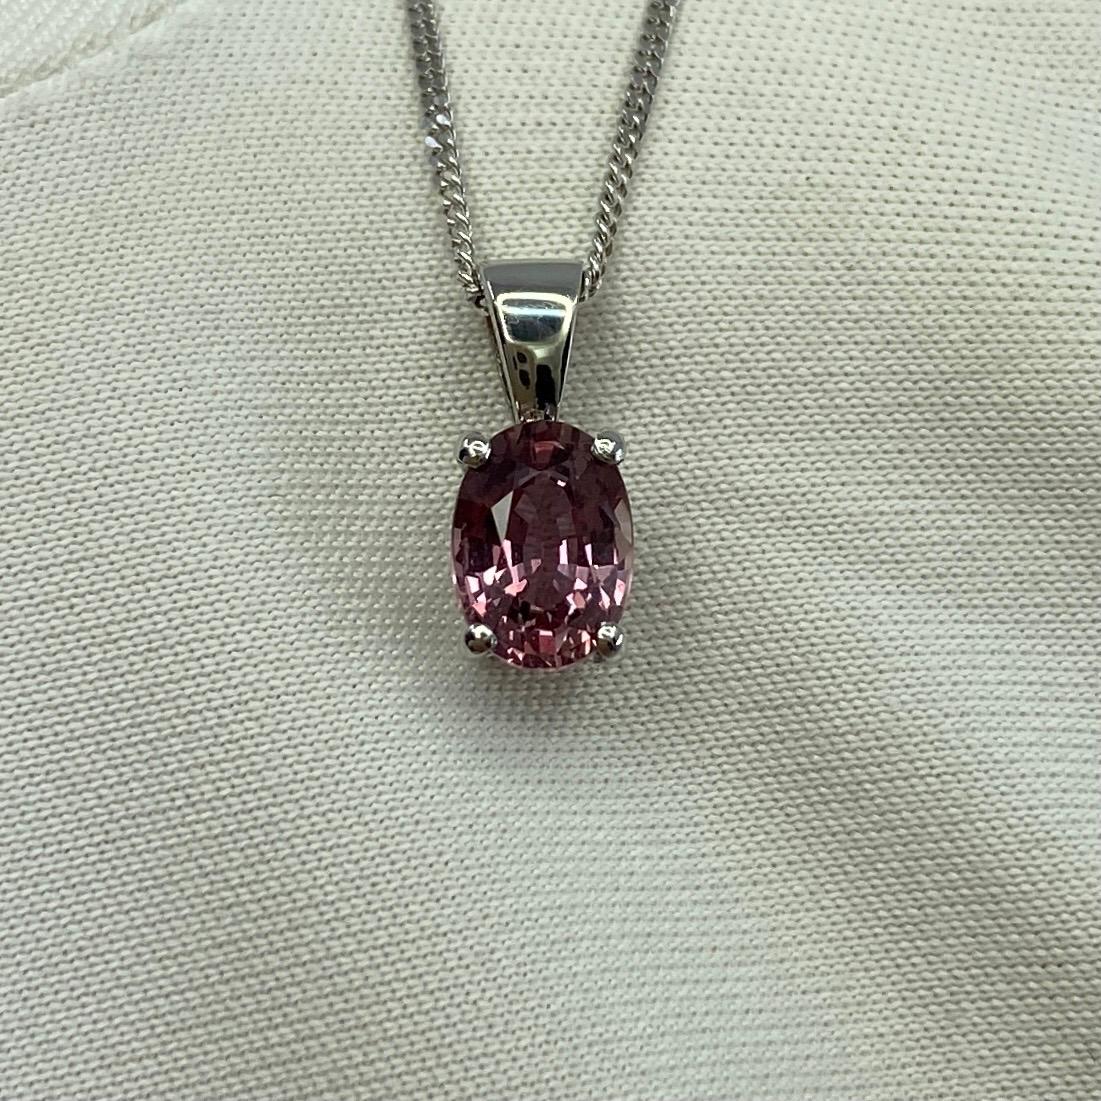 Women's or Men's 1.05ct Certified Natural Untreated Pink Sapphire 18k White Gold Oval Pendant For Sale